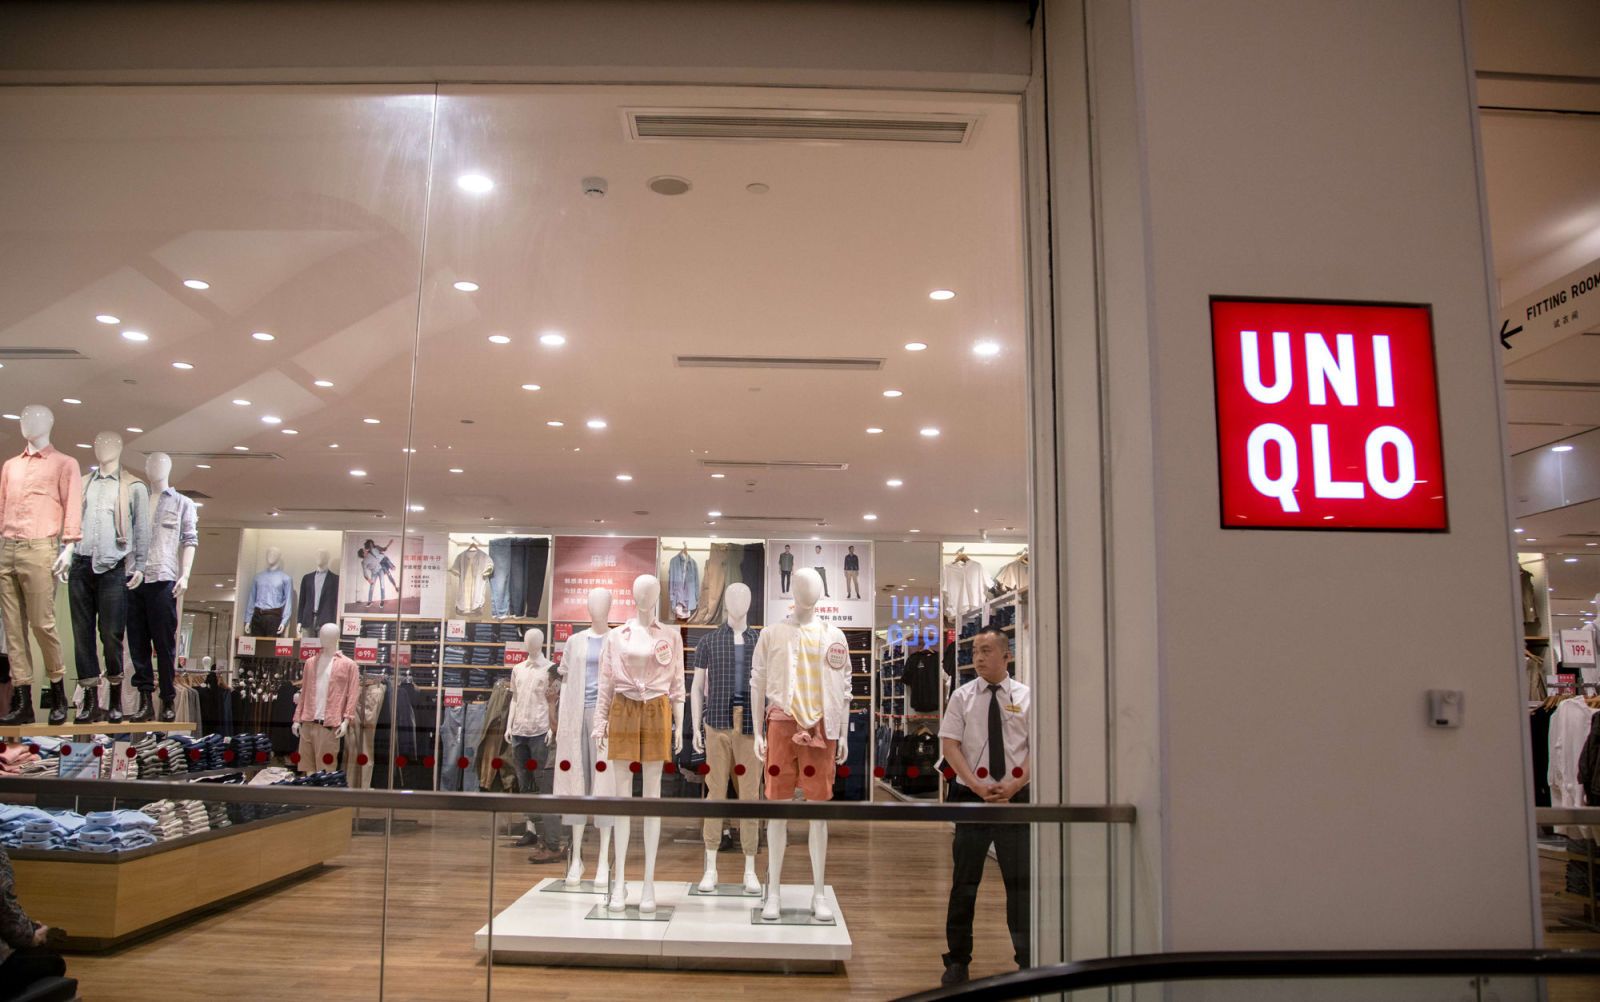 Korean concept store Kioda which resembles Uniqlo lookalike Miniso has  opened in Spore  MothershipSG  News from Singapore Asia and around the  world